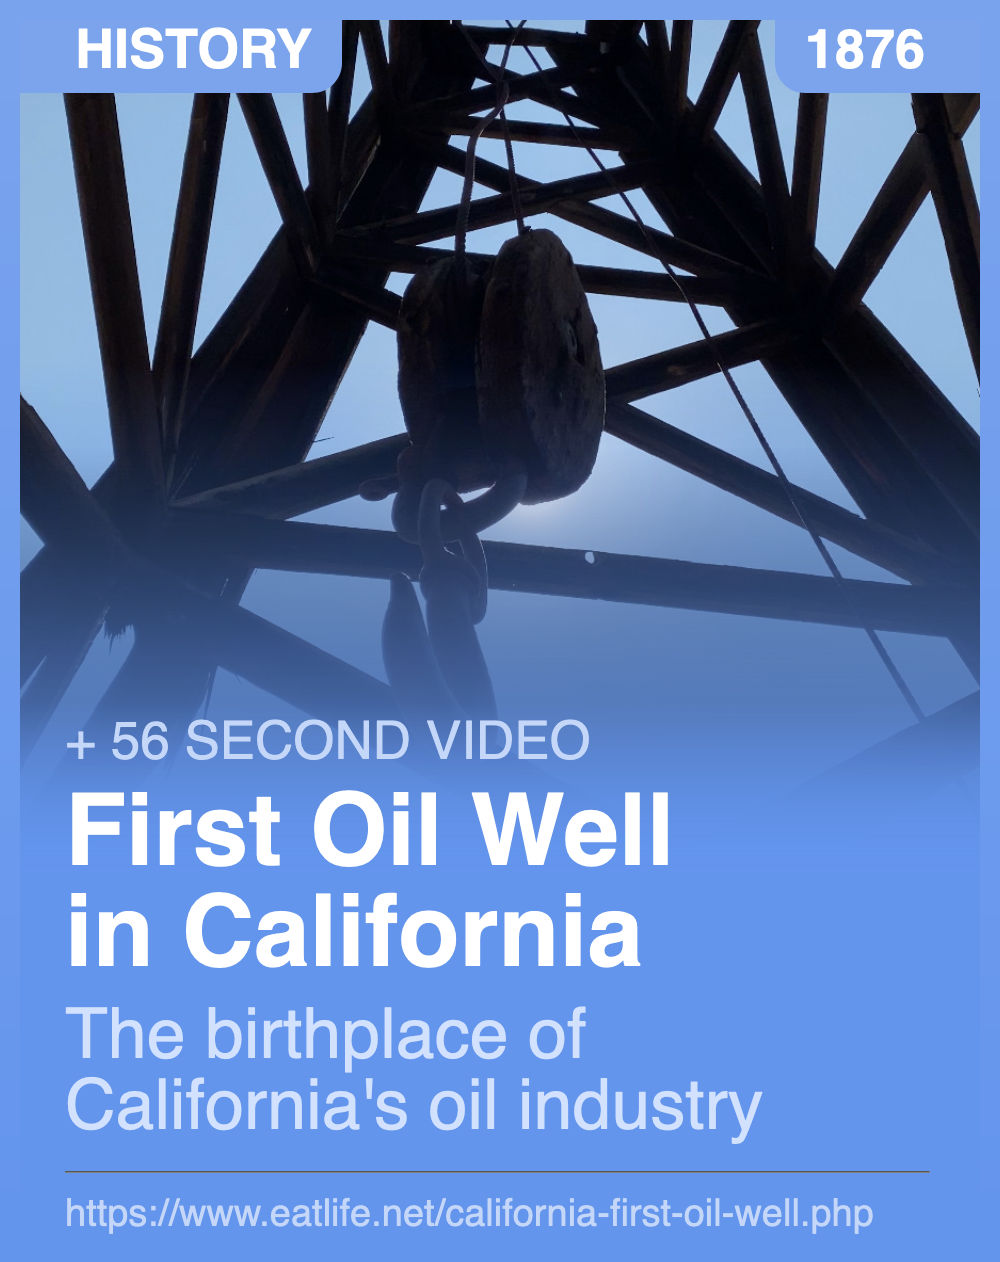 California's First Oil Well